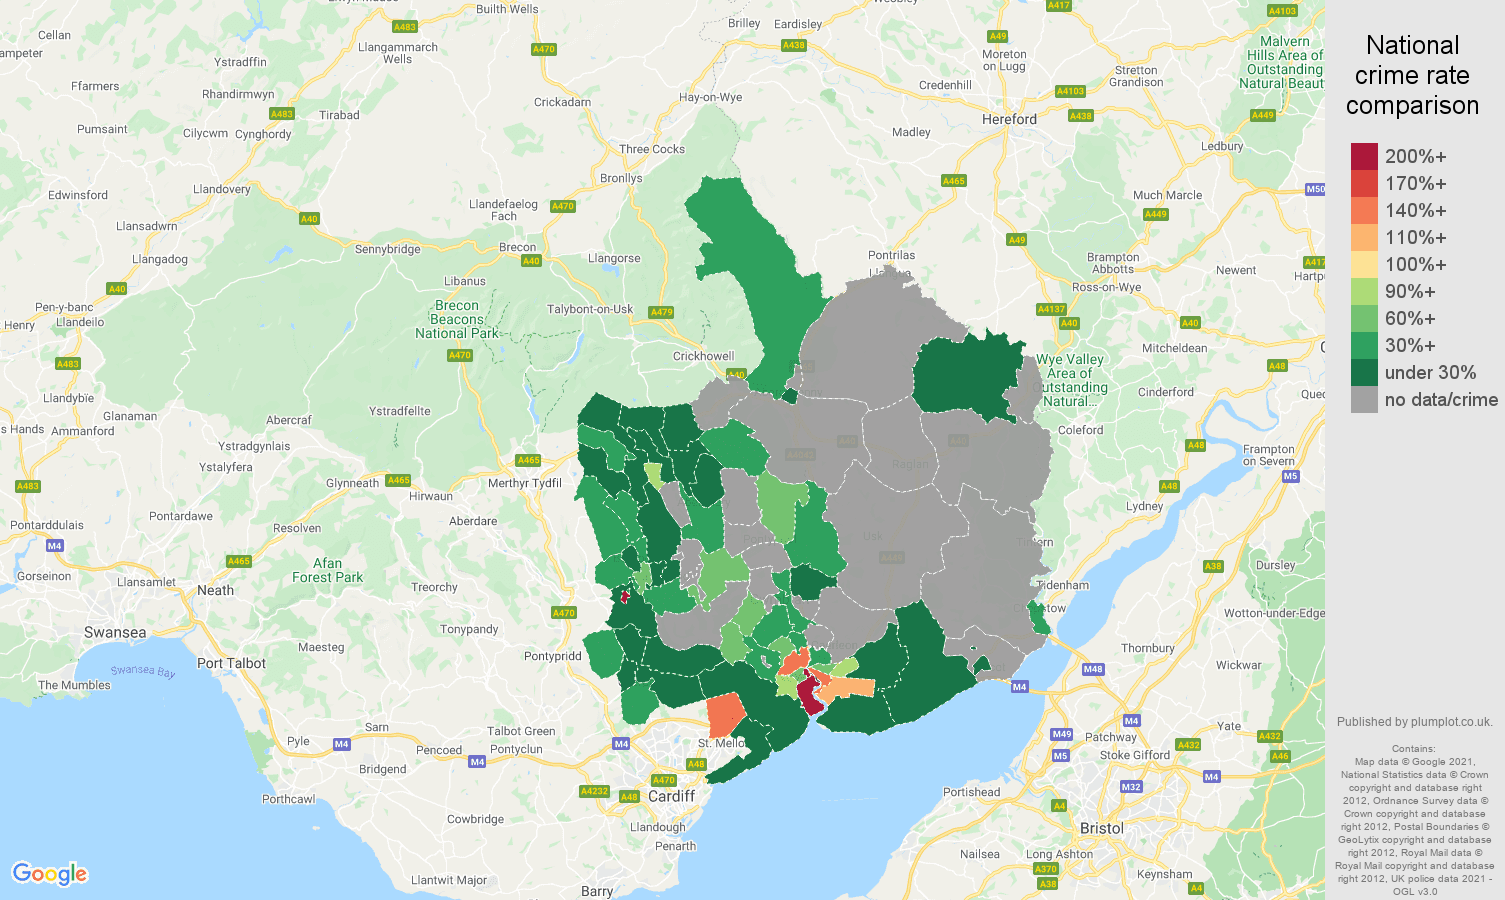 Gwent robbery crime rate comparison map